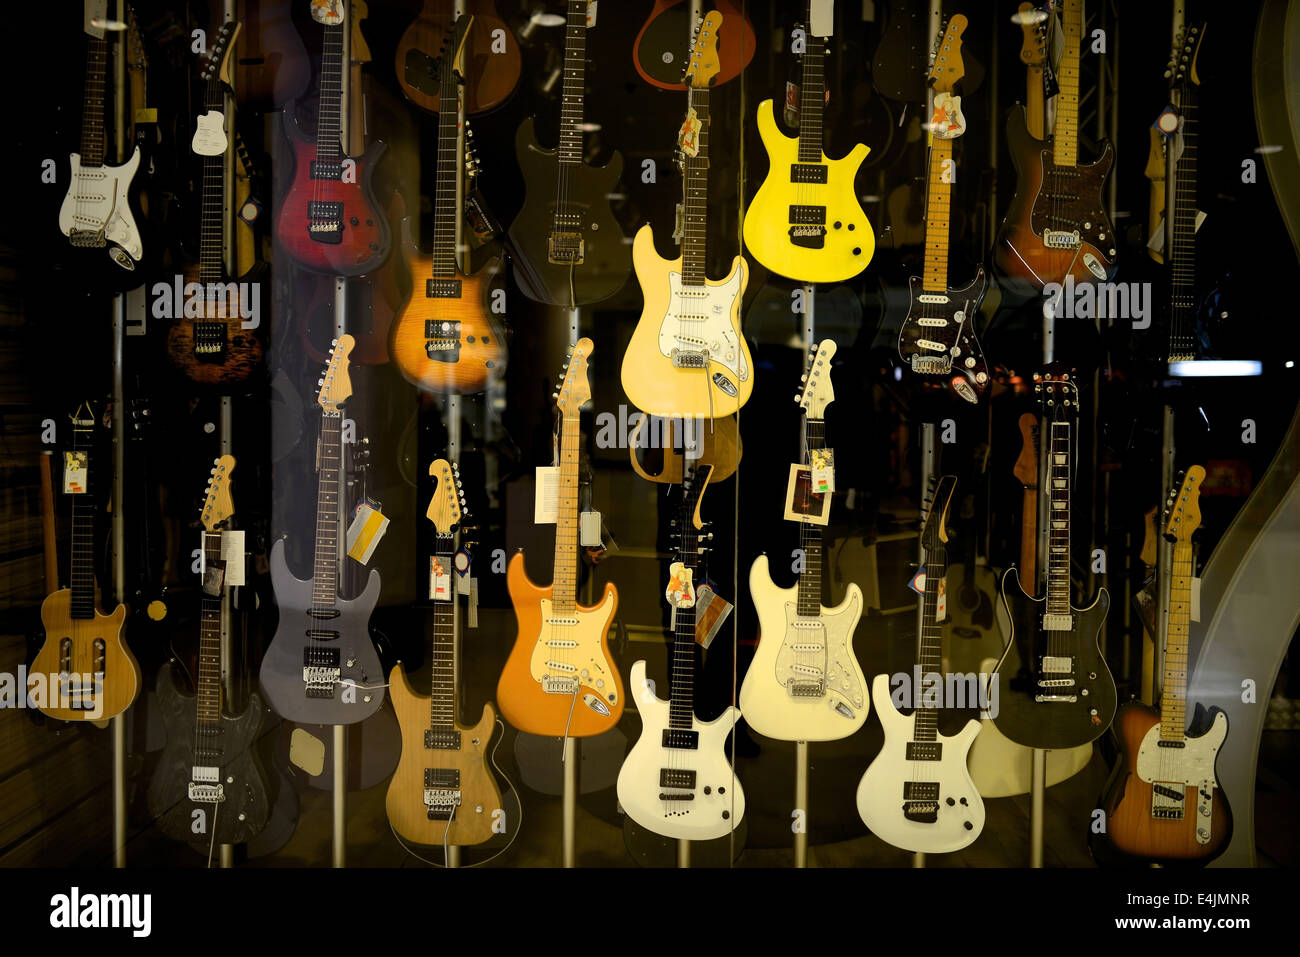 Electric guitars in a music store. Stock Photo